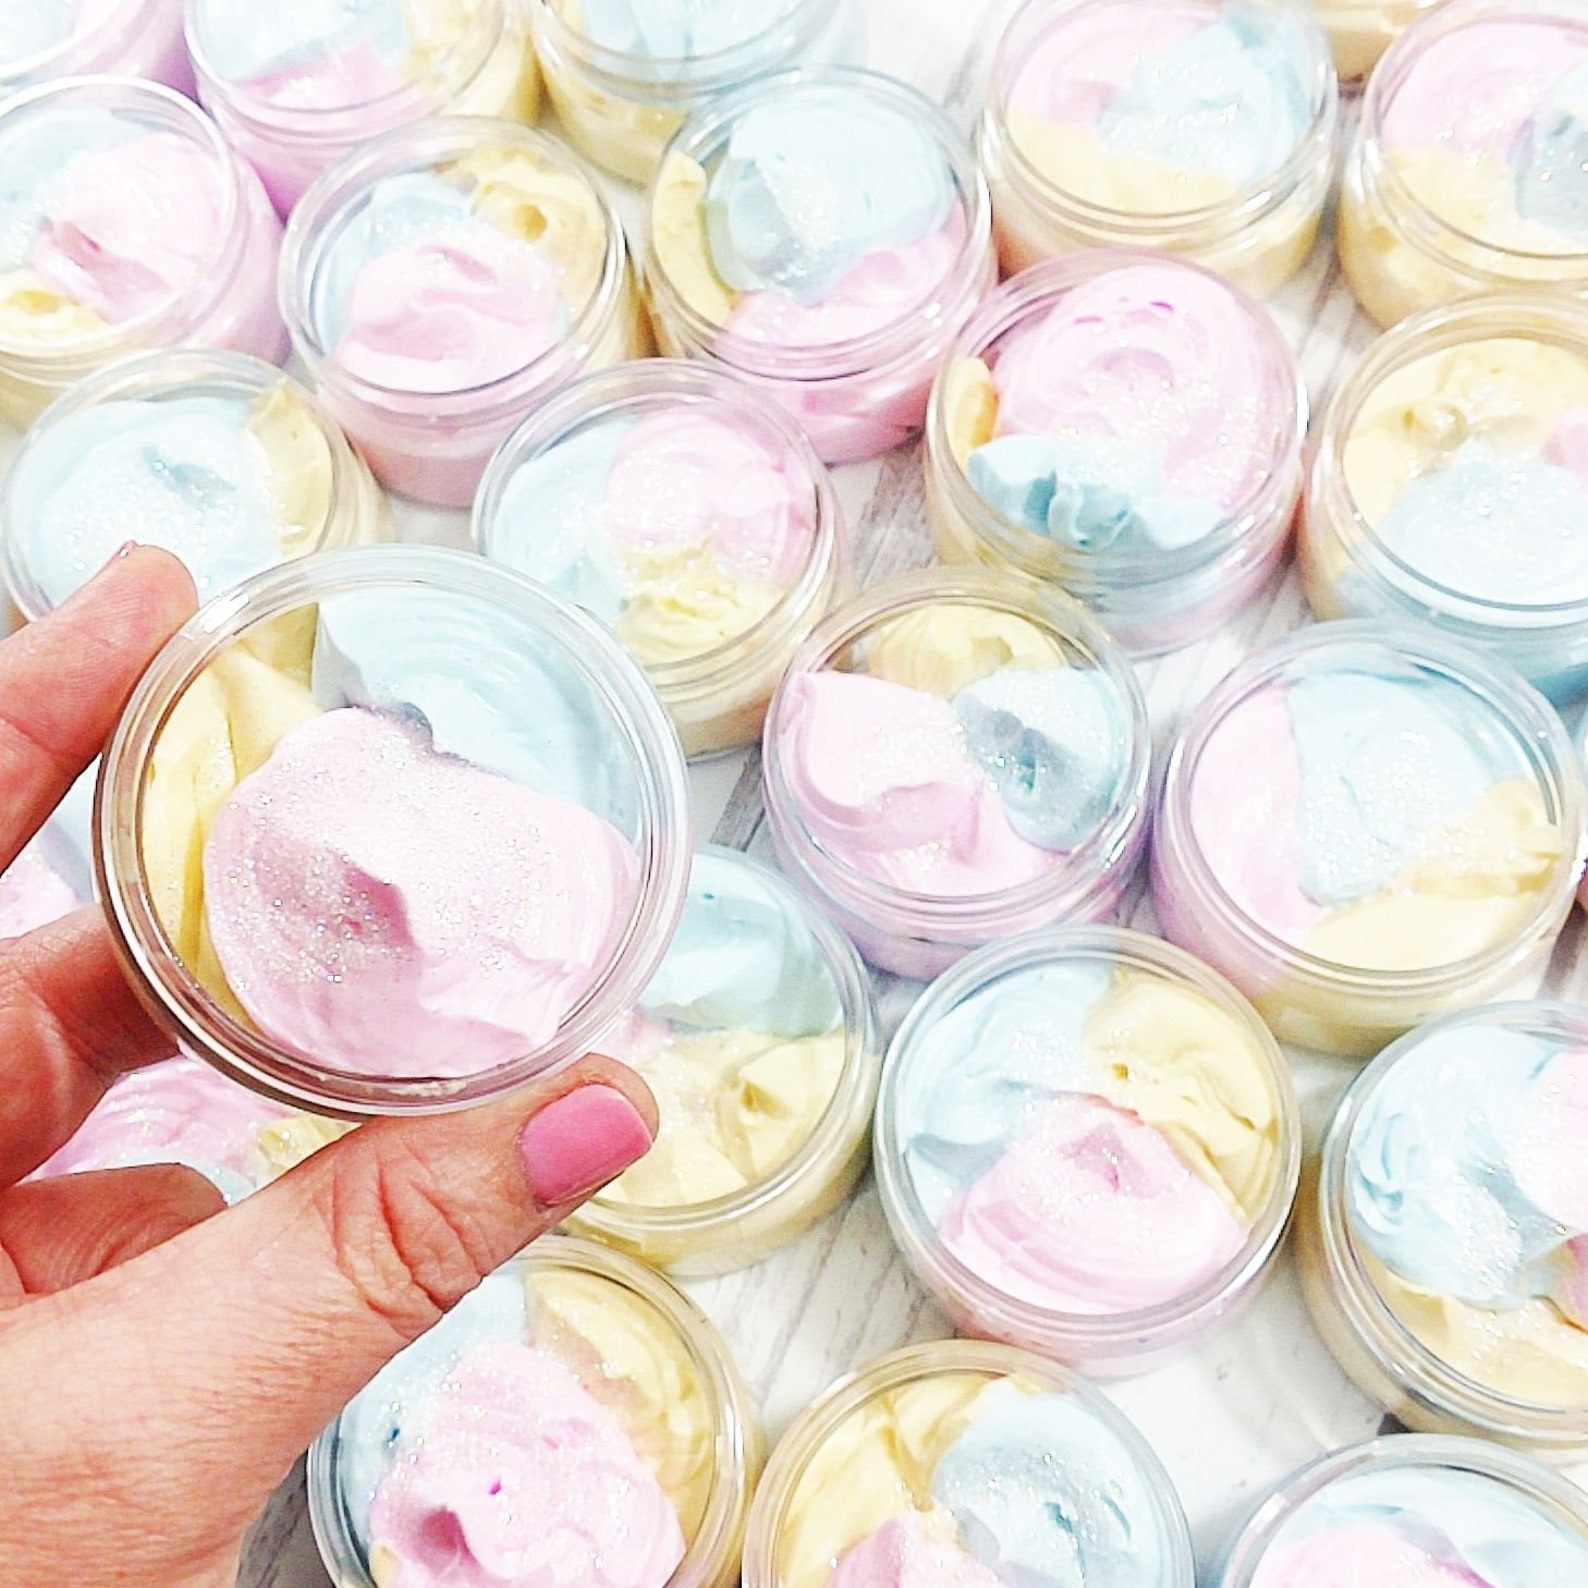 Mini jars containing the rainbow colored whipped cream